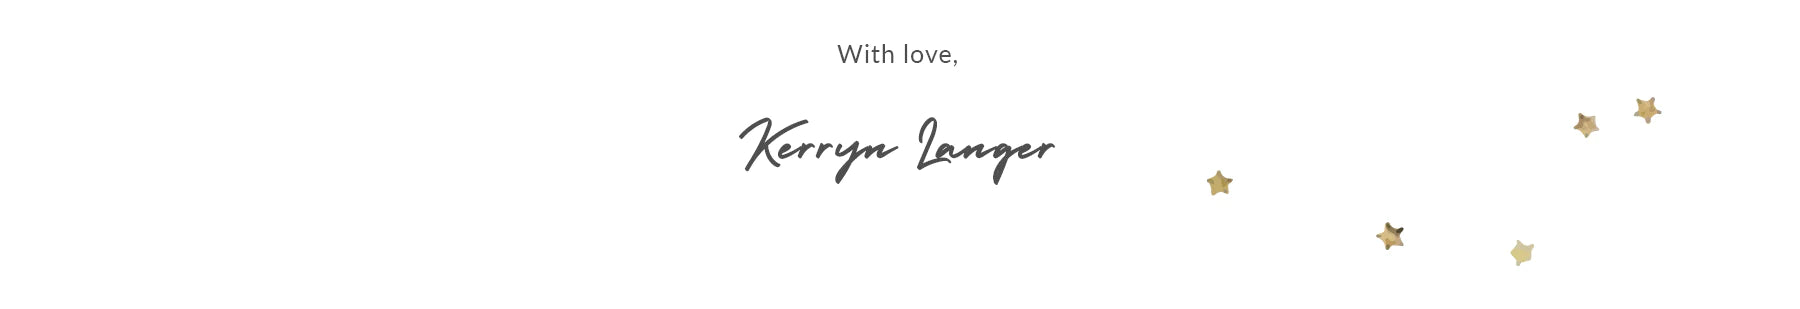 Arms Of Eve founder's signature with love Kerryn Langer, adorned with gold stars